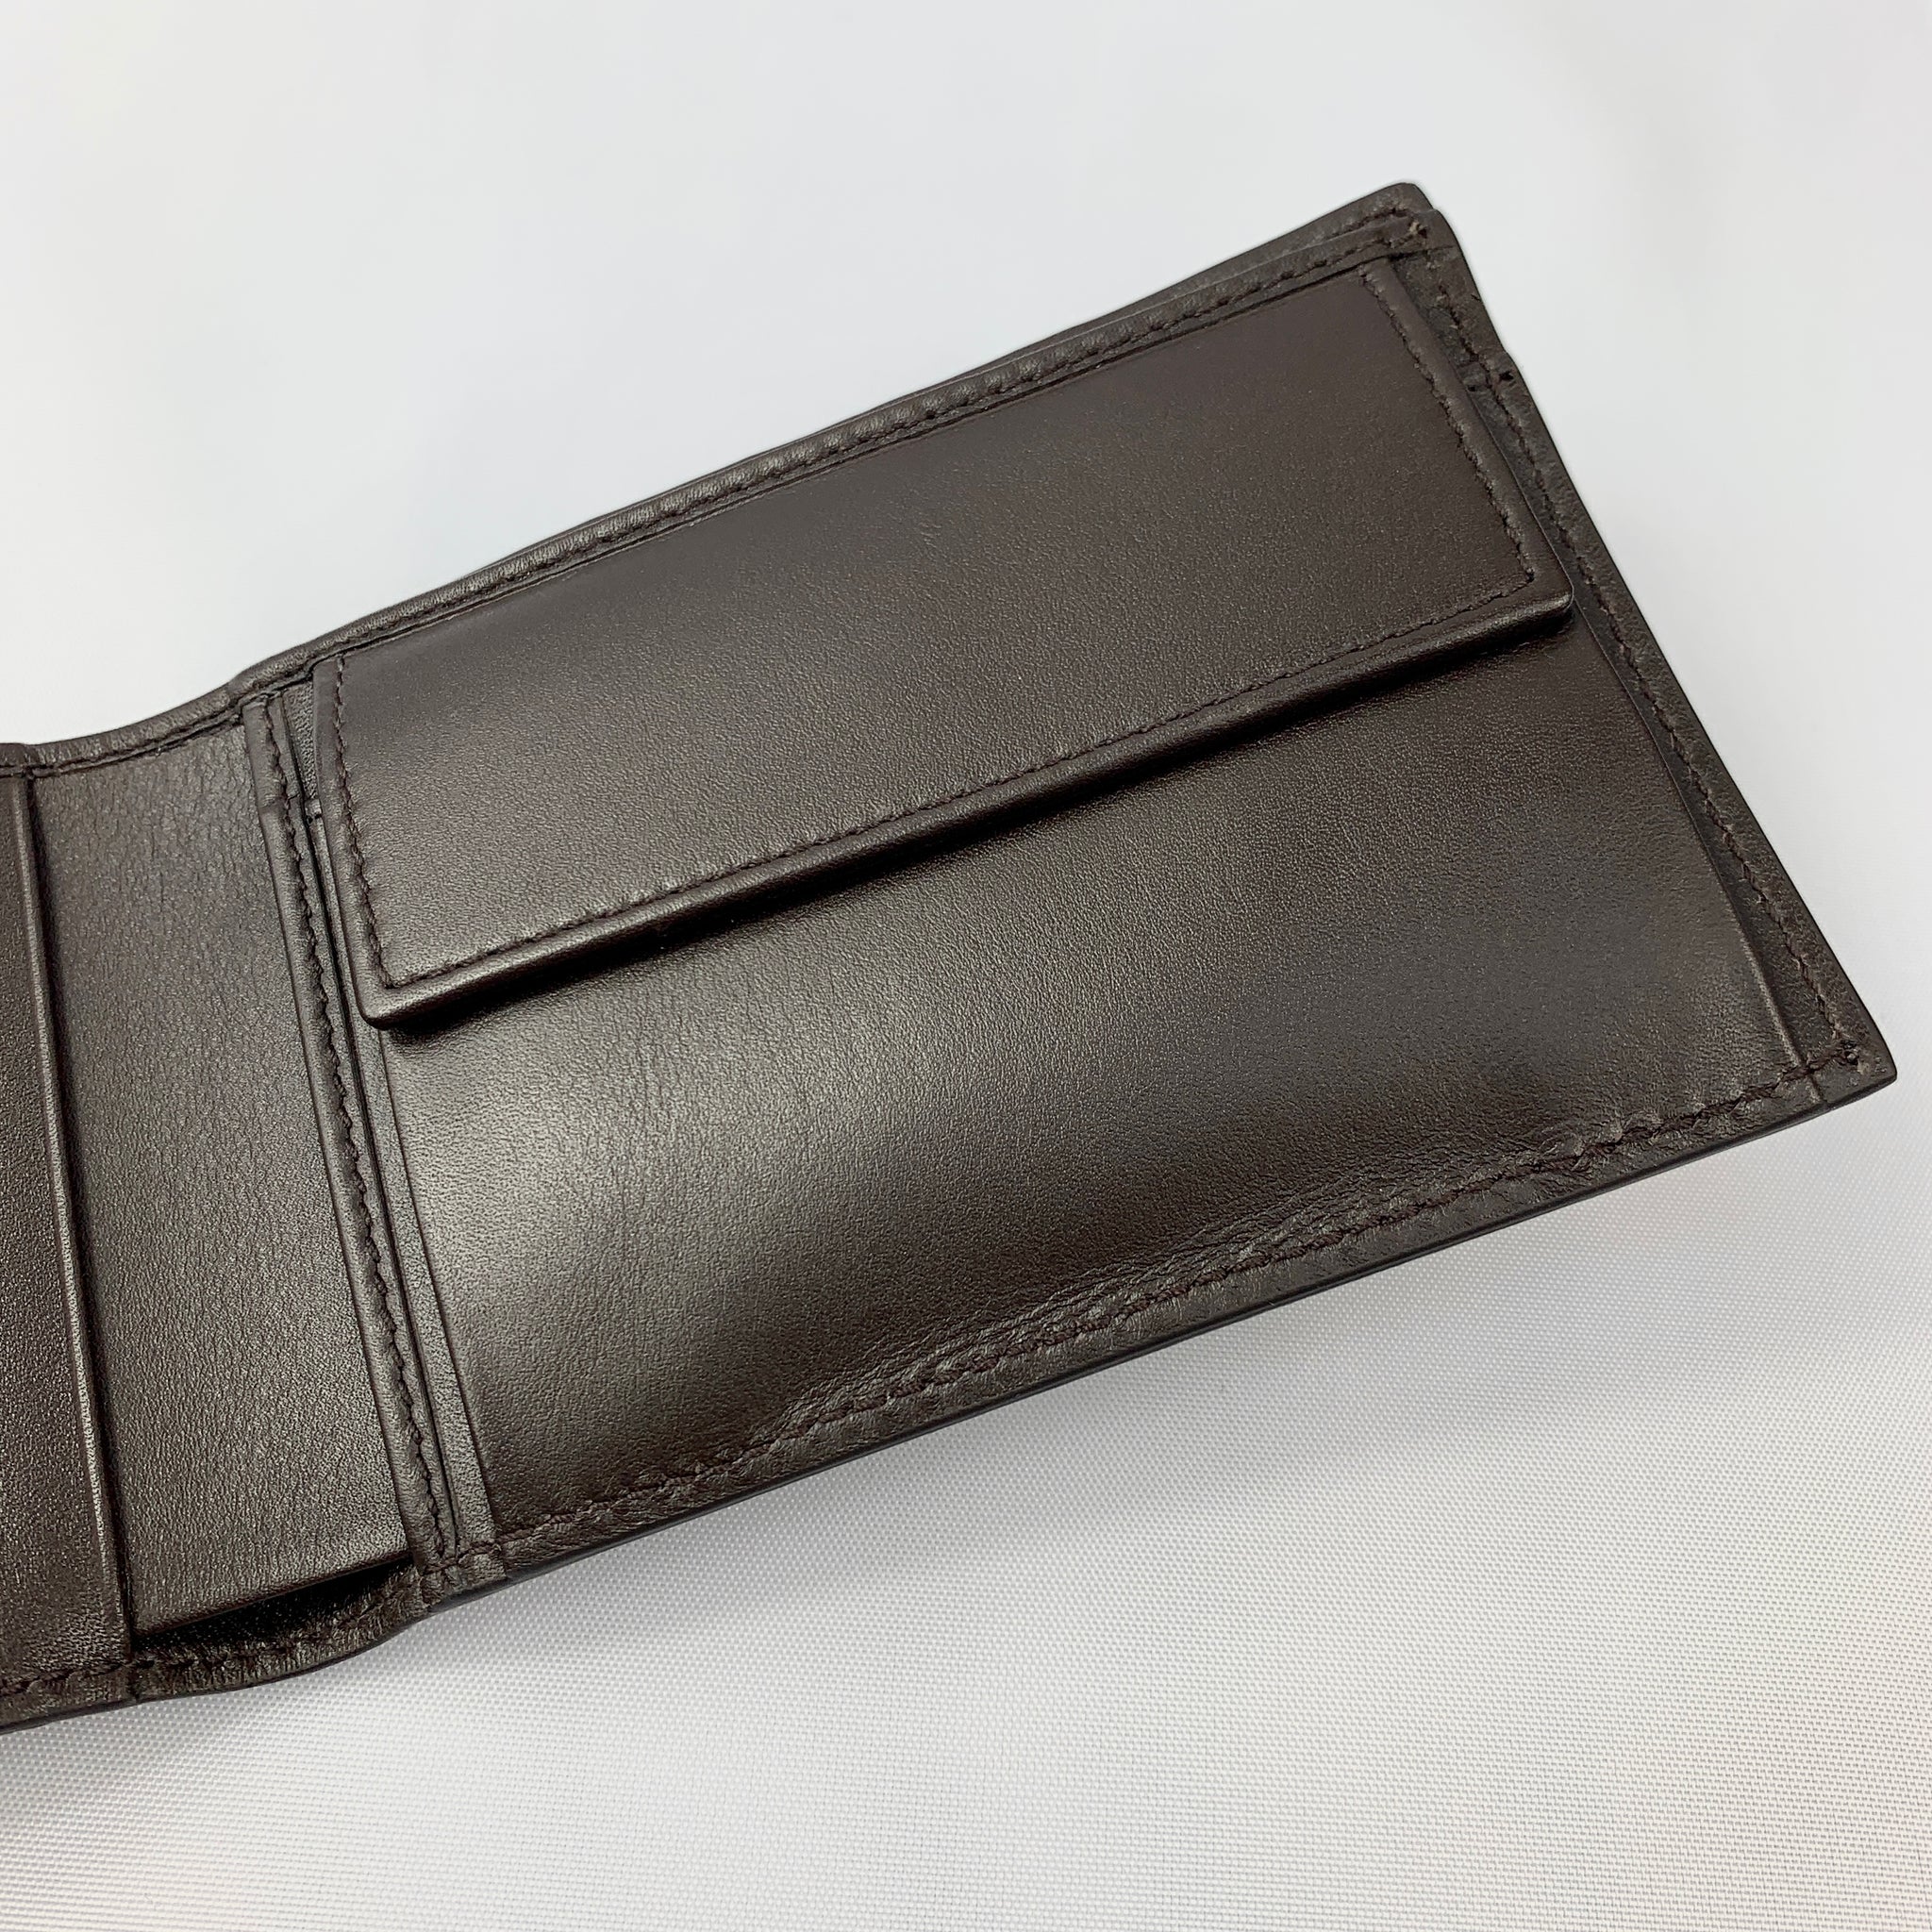 Gucci Men's Brown Leather Microguccissima Bifold Wallet